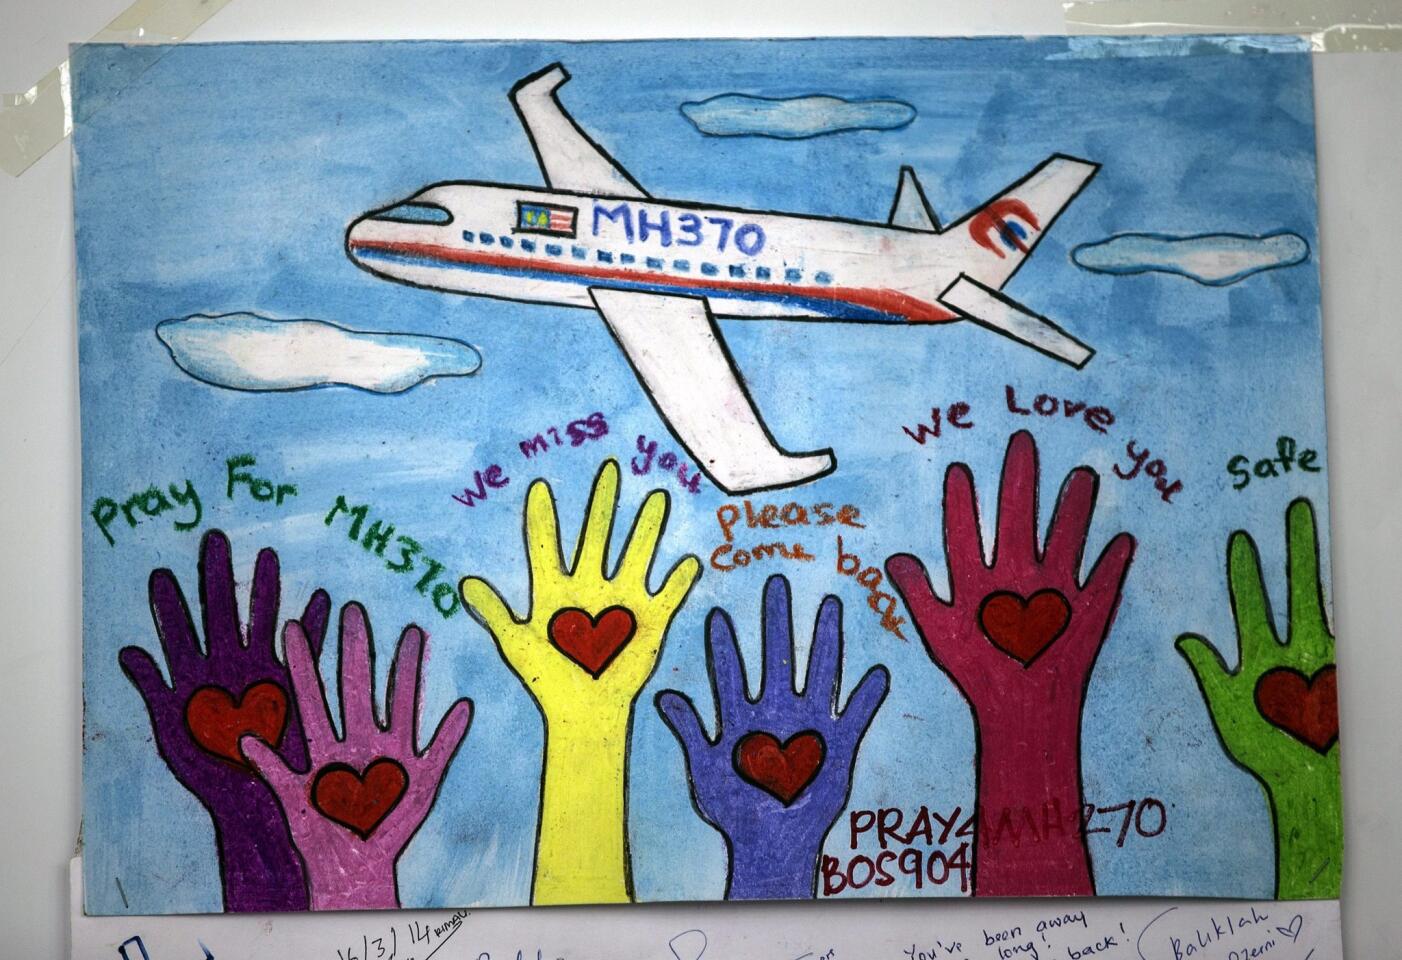 A message of support is displayed at the wall of hope for the missing passengers of the Malaysian Airlines plane at Kuala Lumpur International Airport viewing gallery, Malaysia, 18 March 2014.